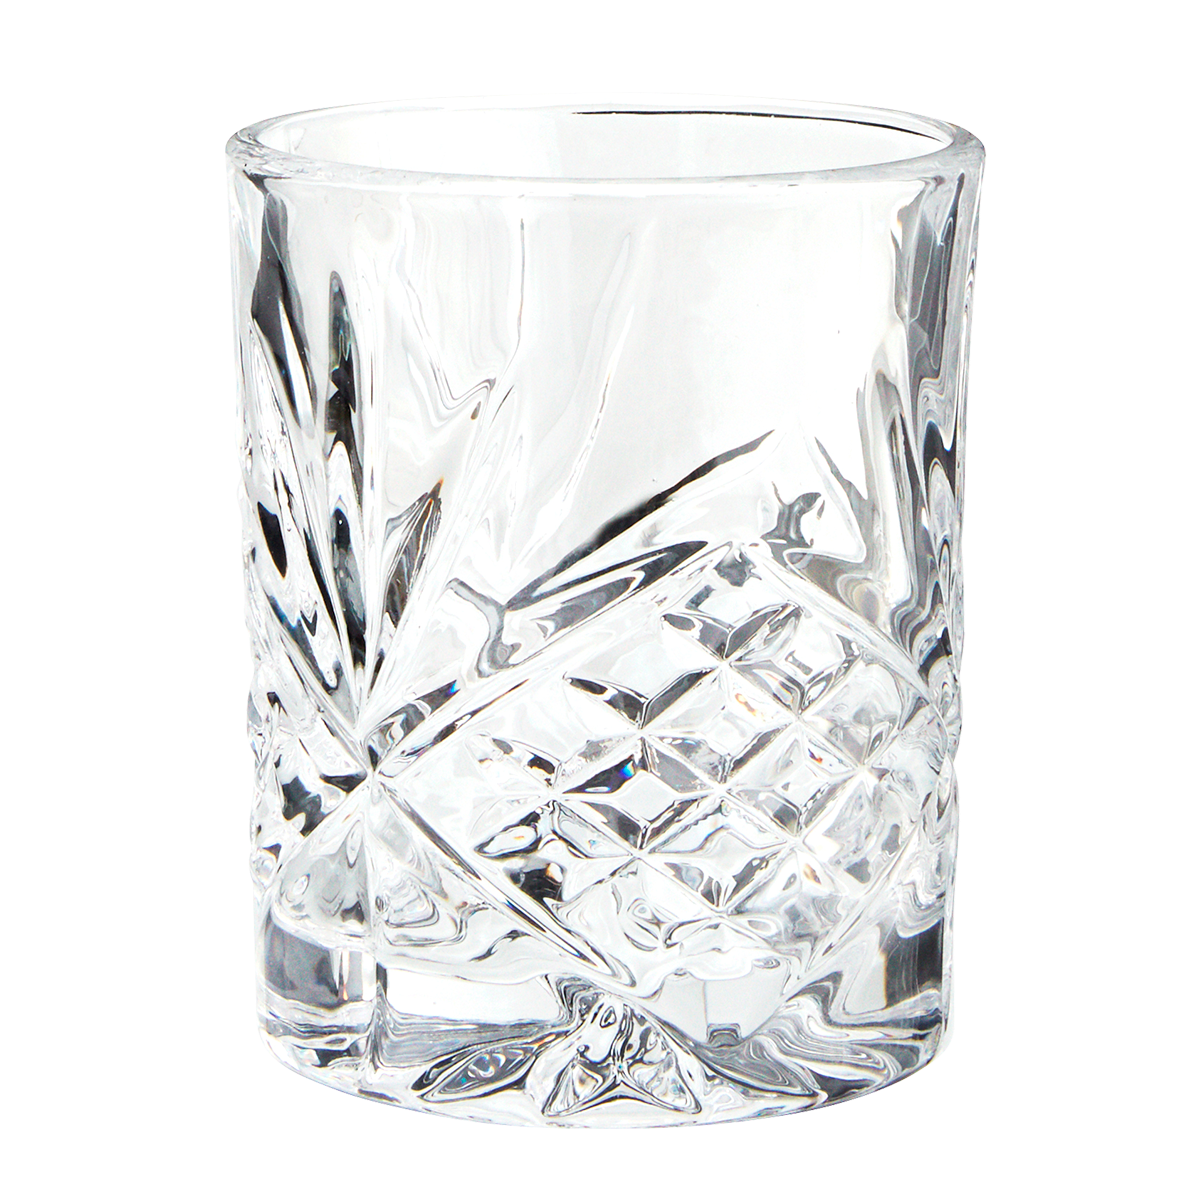 Tumbler Glass with Cuttings